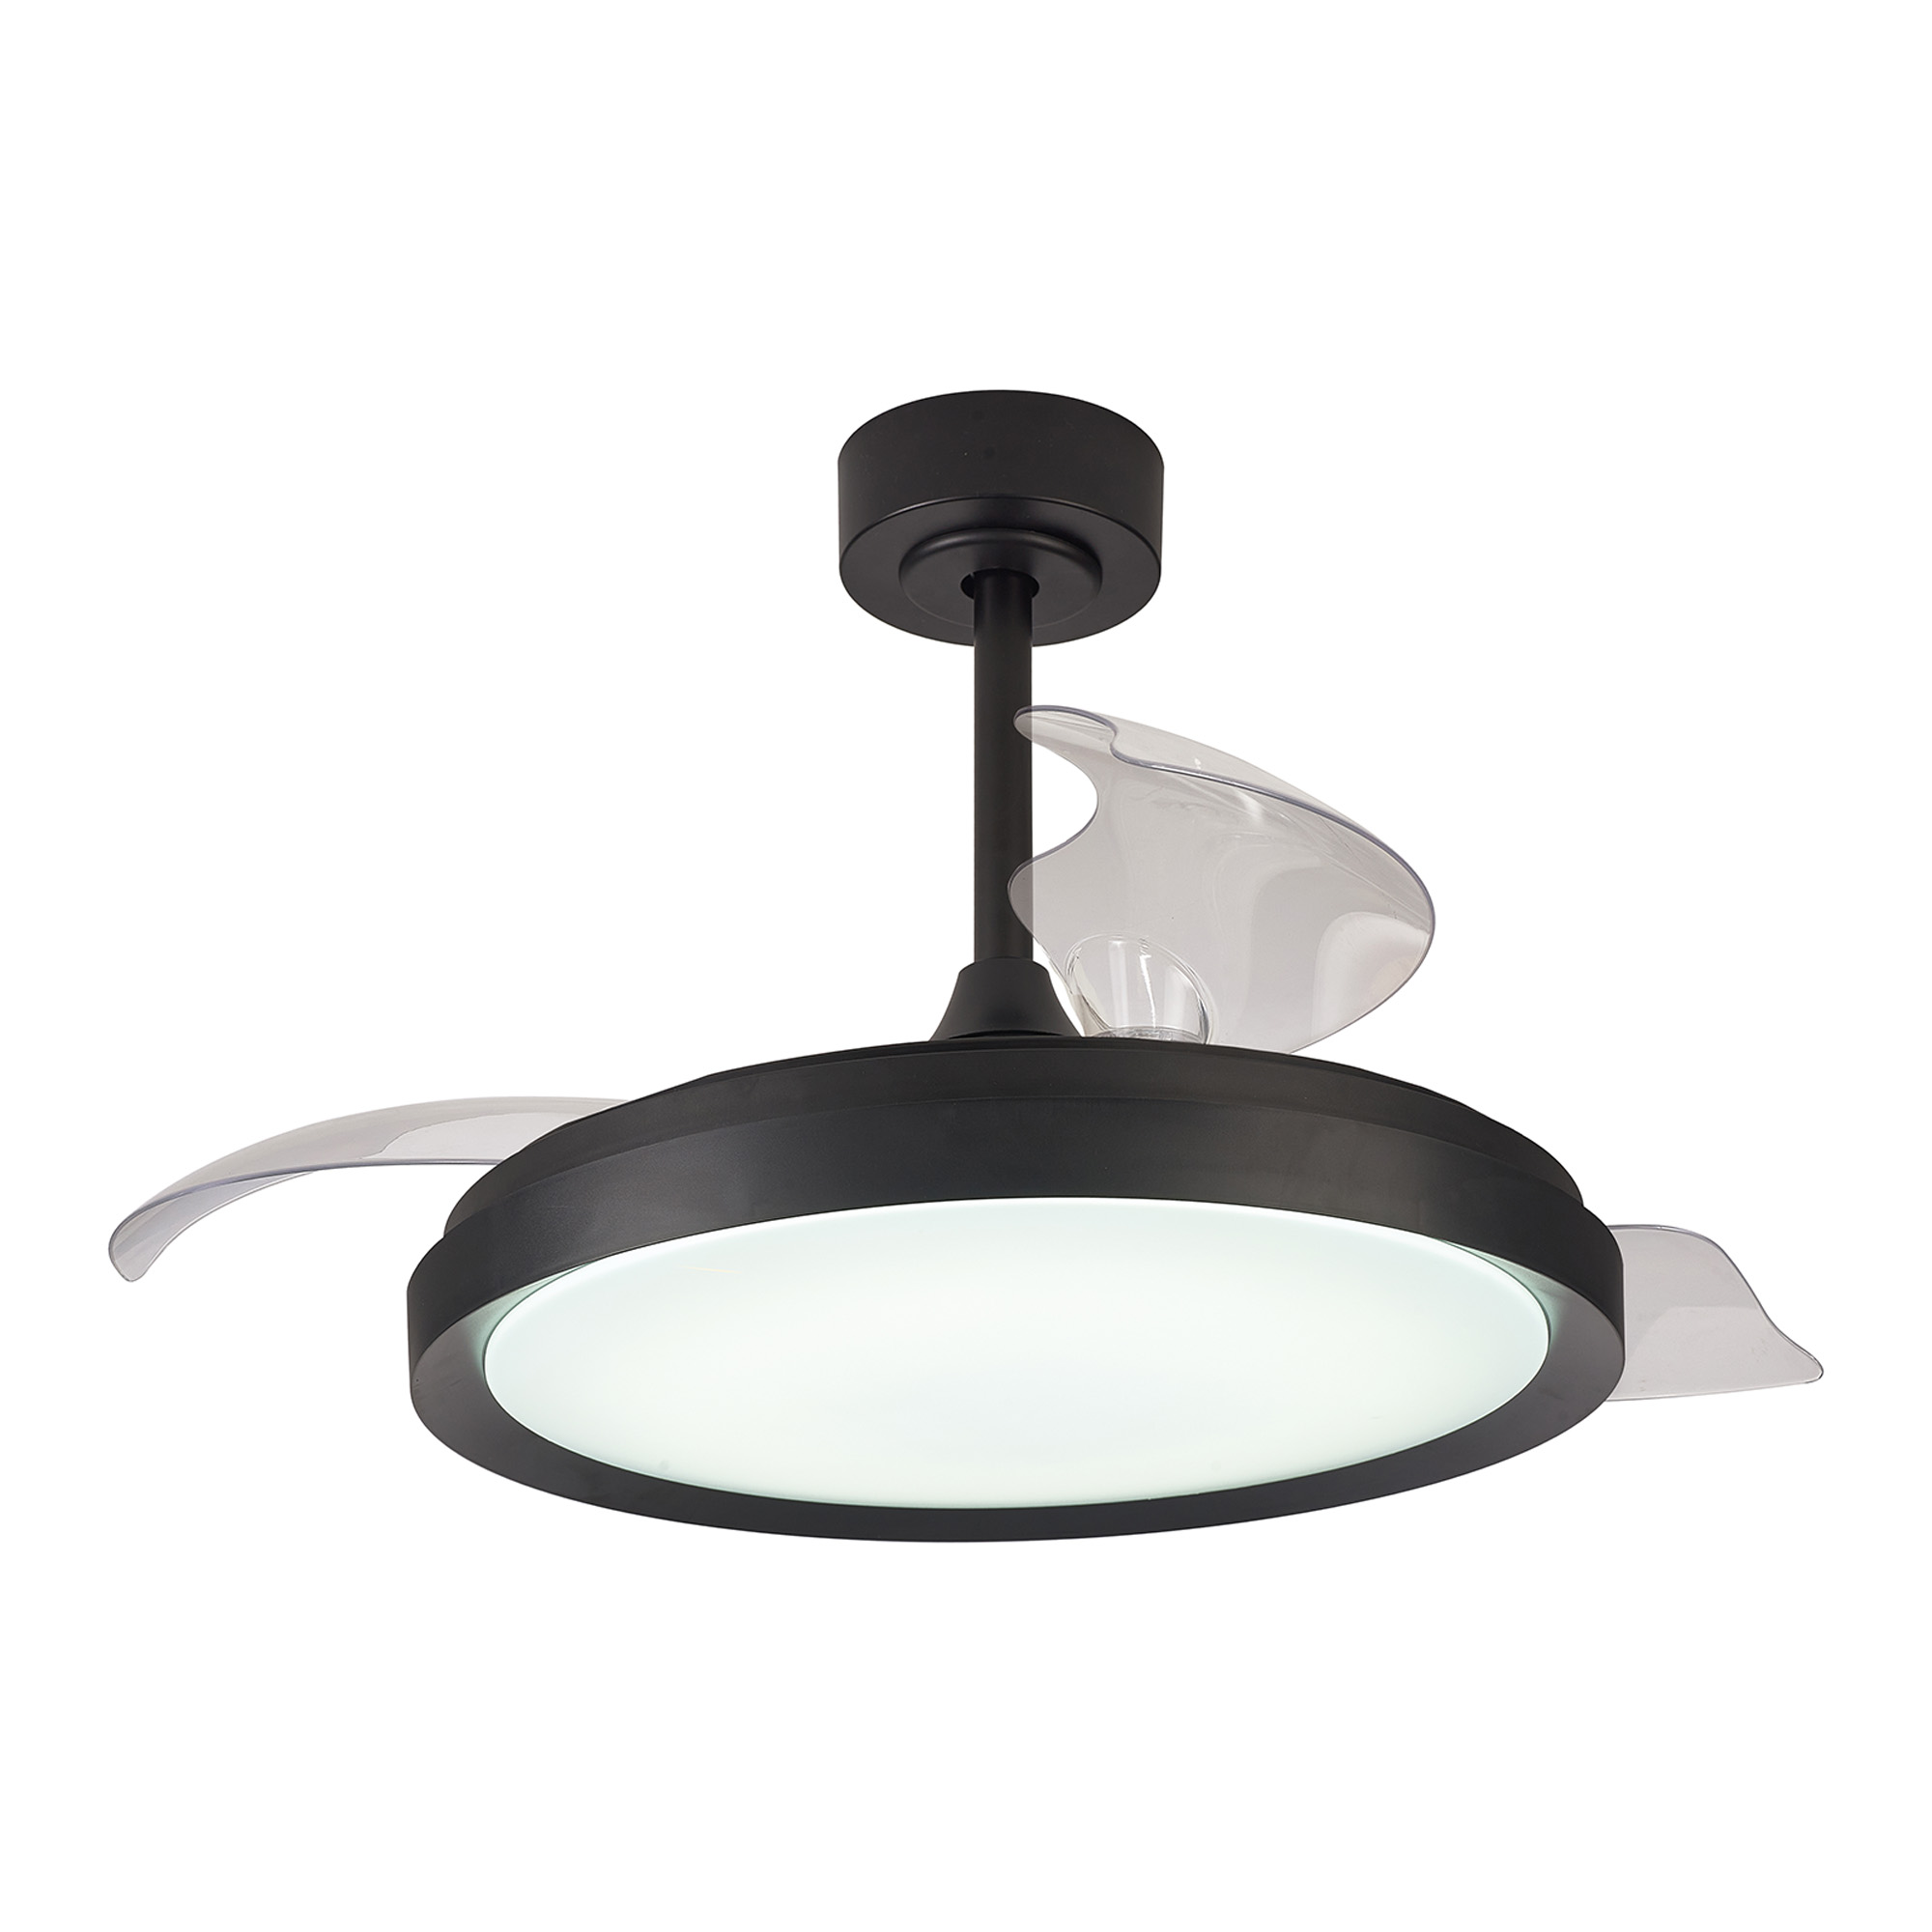 M8828  Mistral 50W LED Dimmable Ceiling Light With Built-In 30W DC Fan; 2700-5000K Remote Control; Black